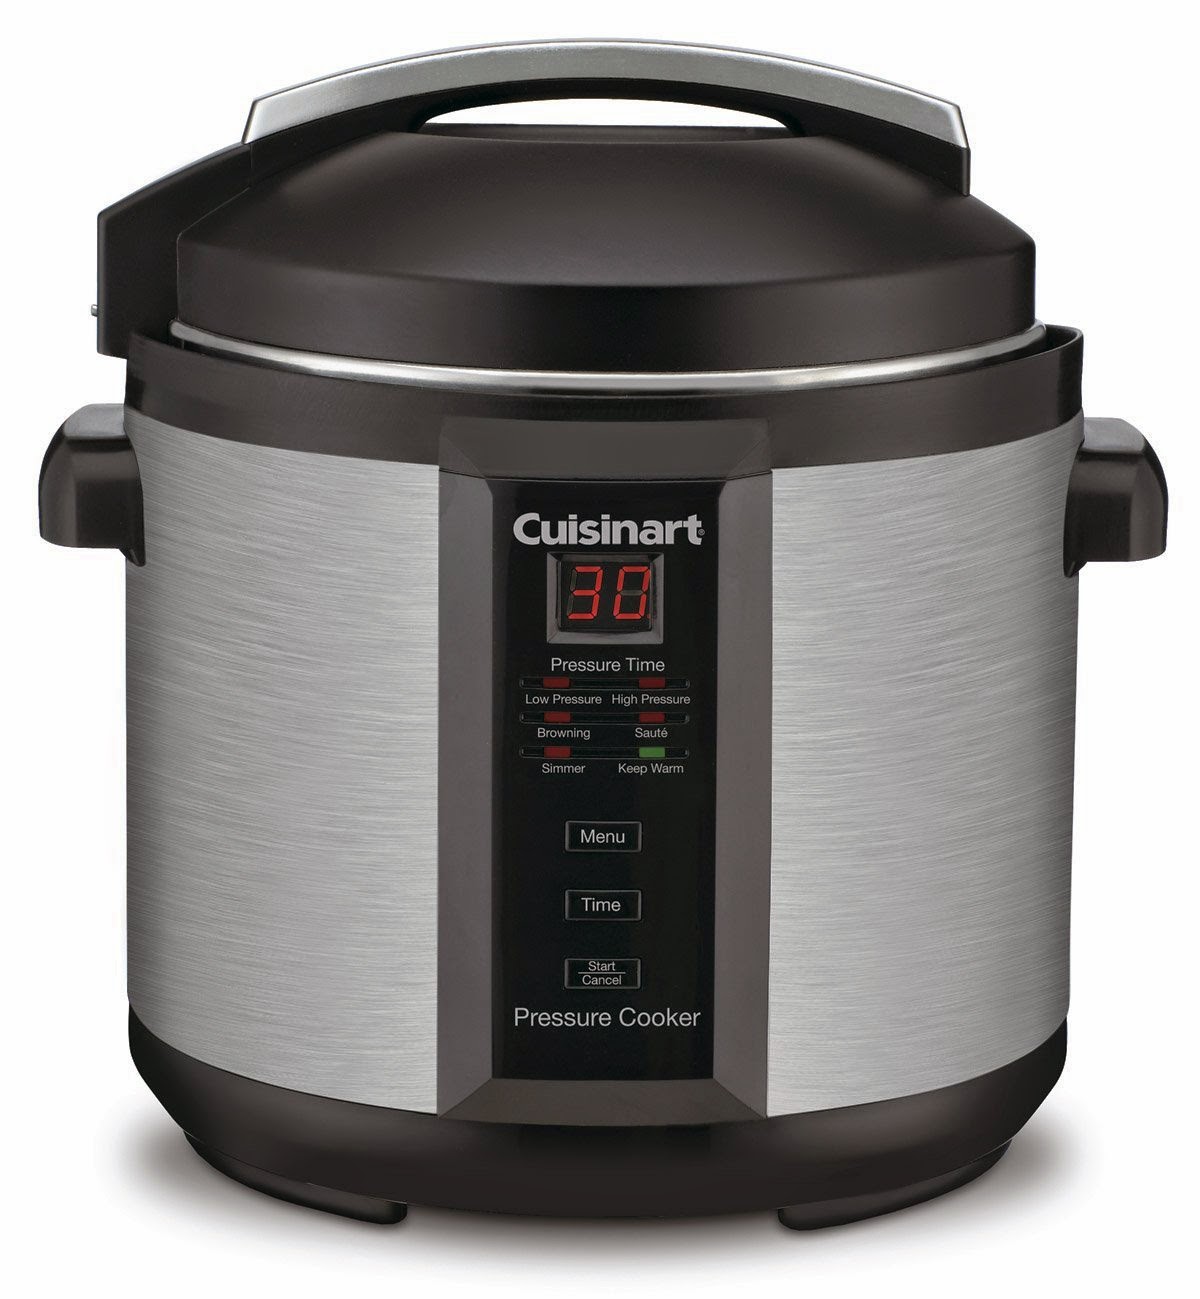 Cuisinart CPC-600 1000-Watt 6-Quart Electric Pressure Cooker, review, two psi settings of 6 and 10, timer feature, save 70% cooking time